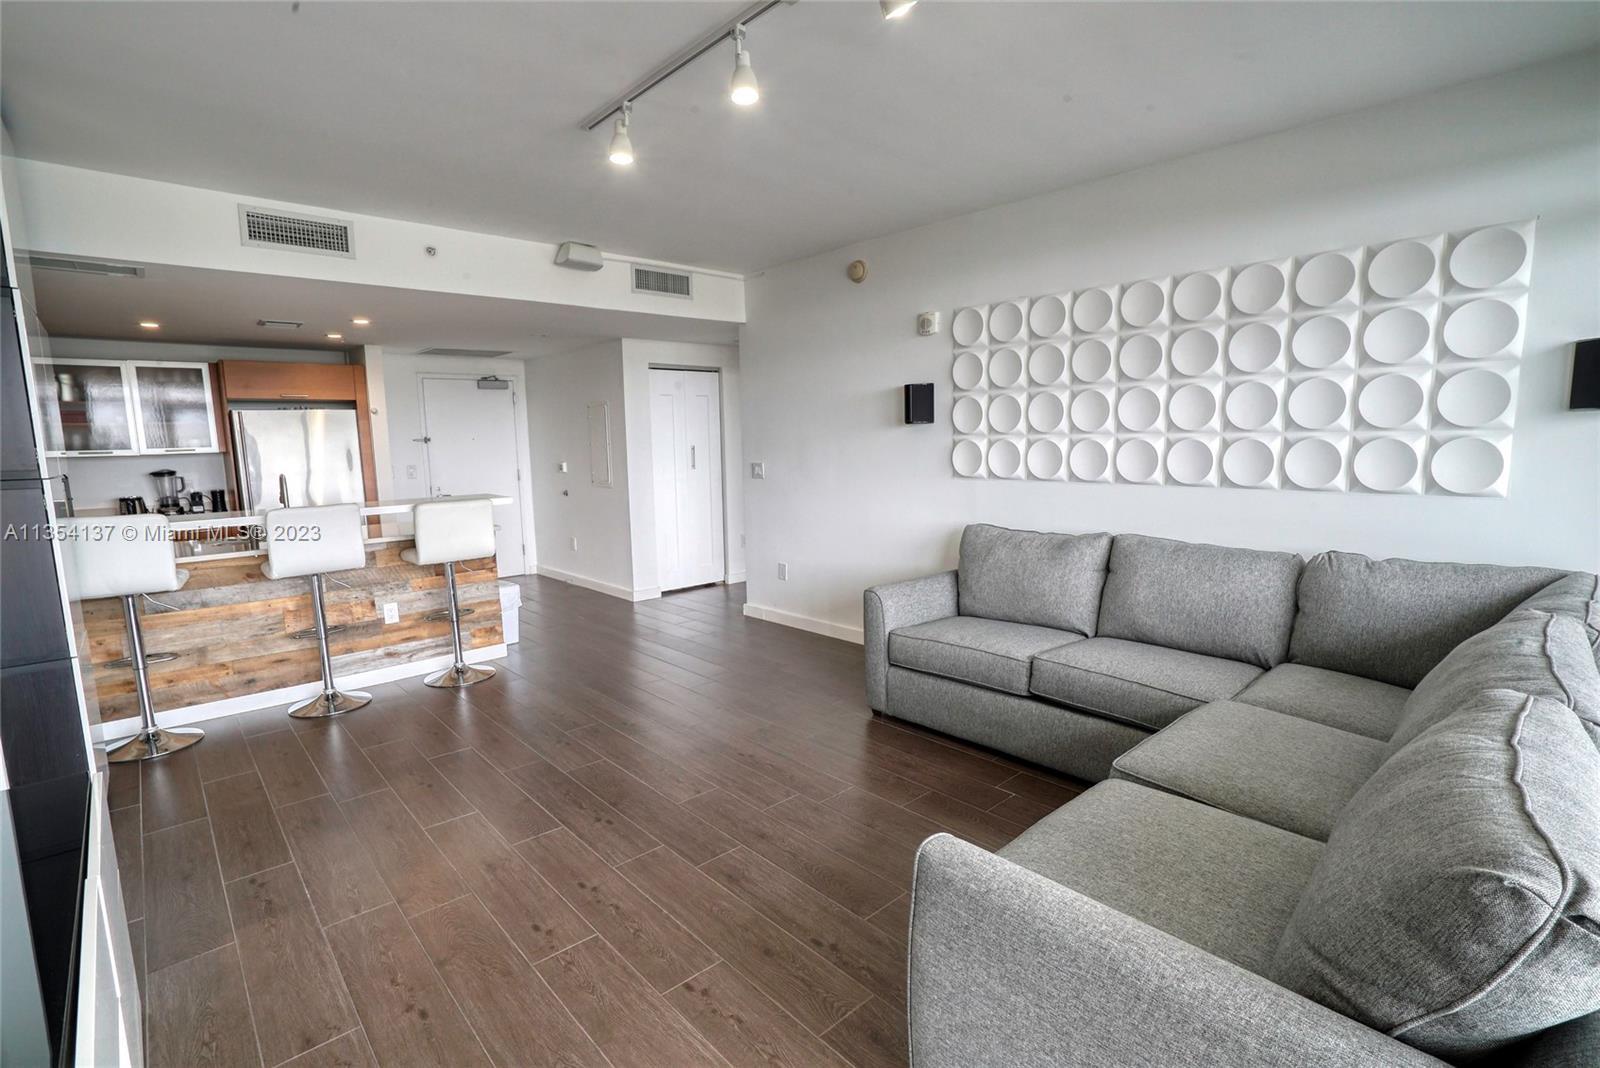 Fall in love with this Ultra-Modern 2 Bed + 2 Bath in the heart of Midtown. 10 Feet high ceilings! W